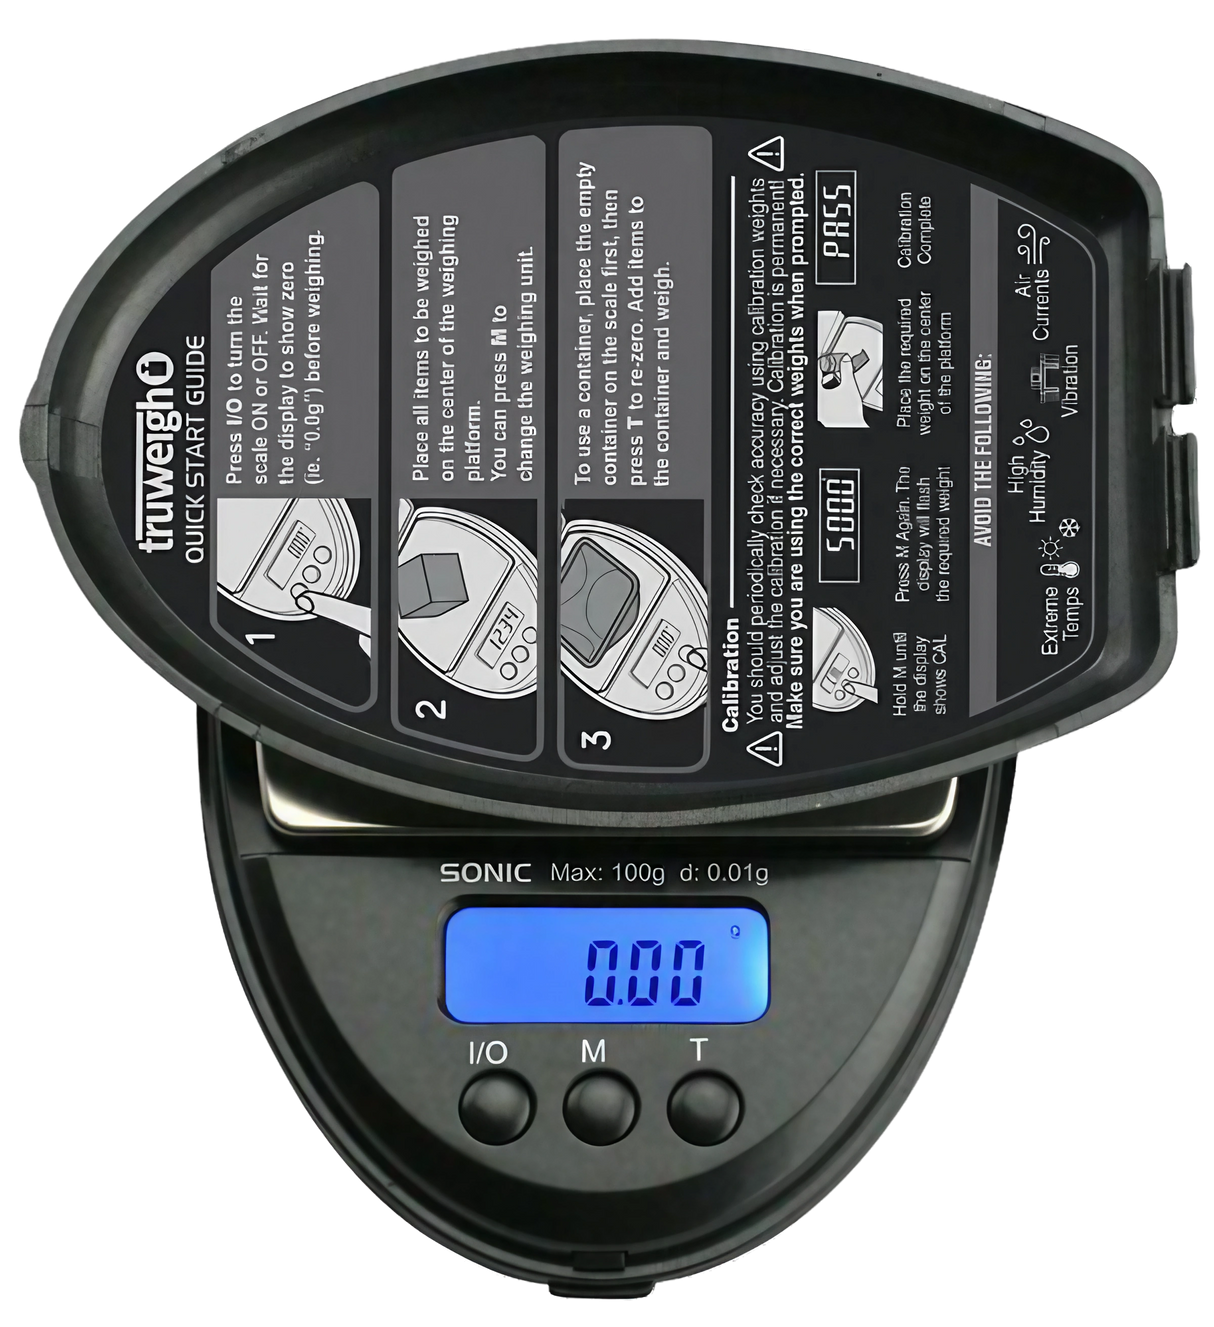 Truweigh Sonic Digital Mini Scale in black, top view, with blue backlit display showing 0.00